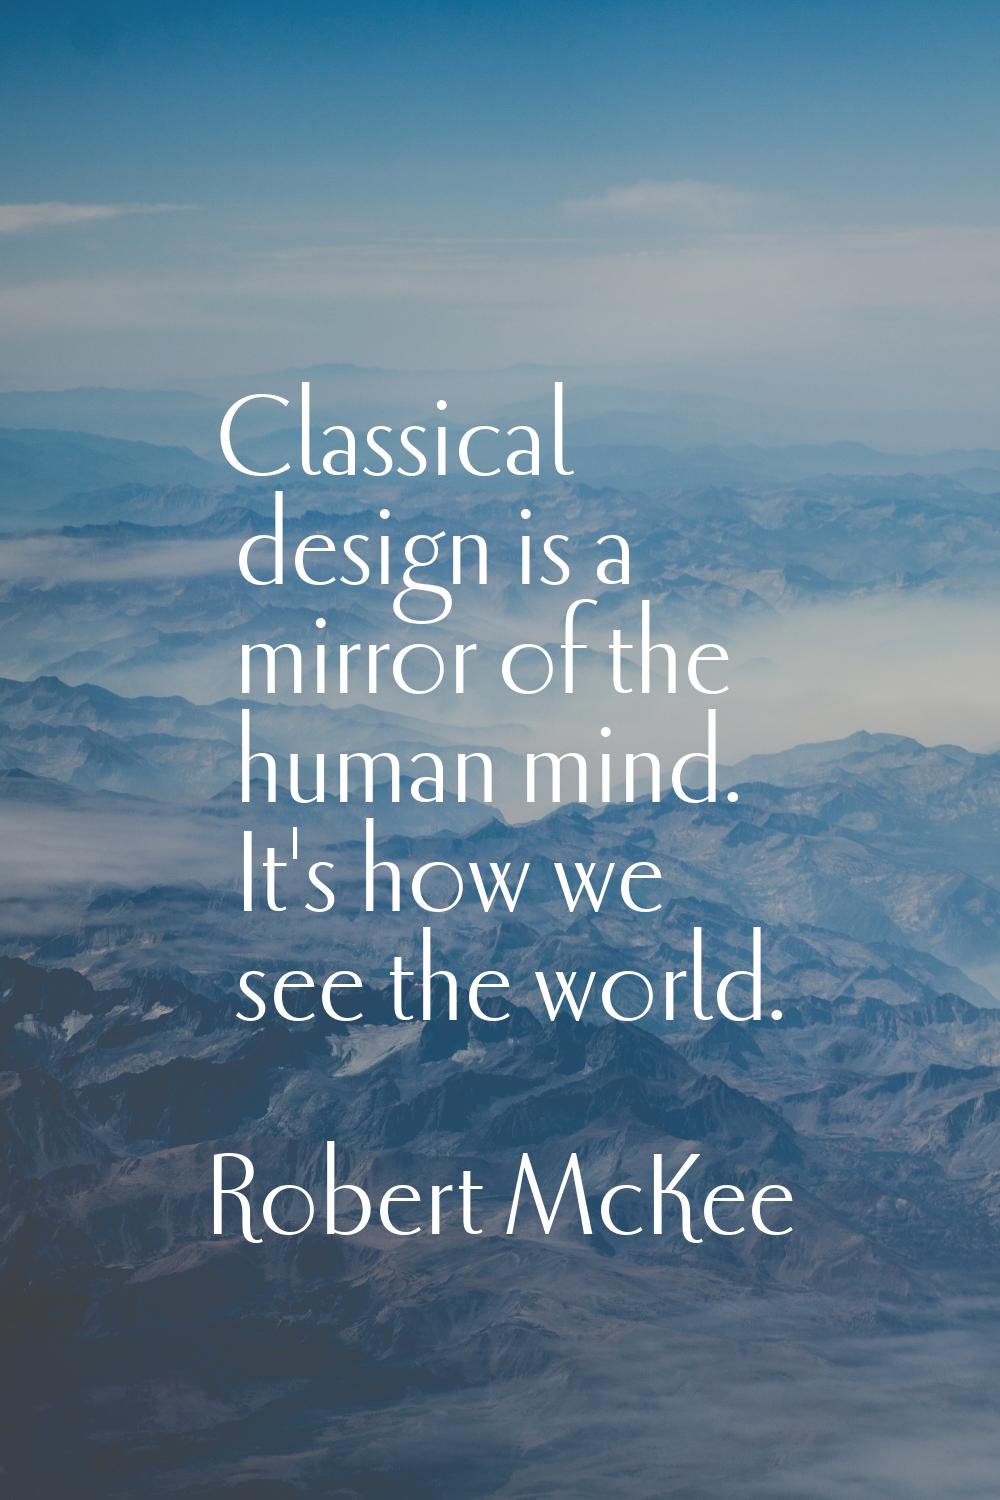 Classical design is a mirror of the human mind. It's how we see the world.